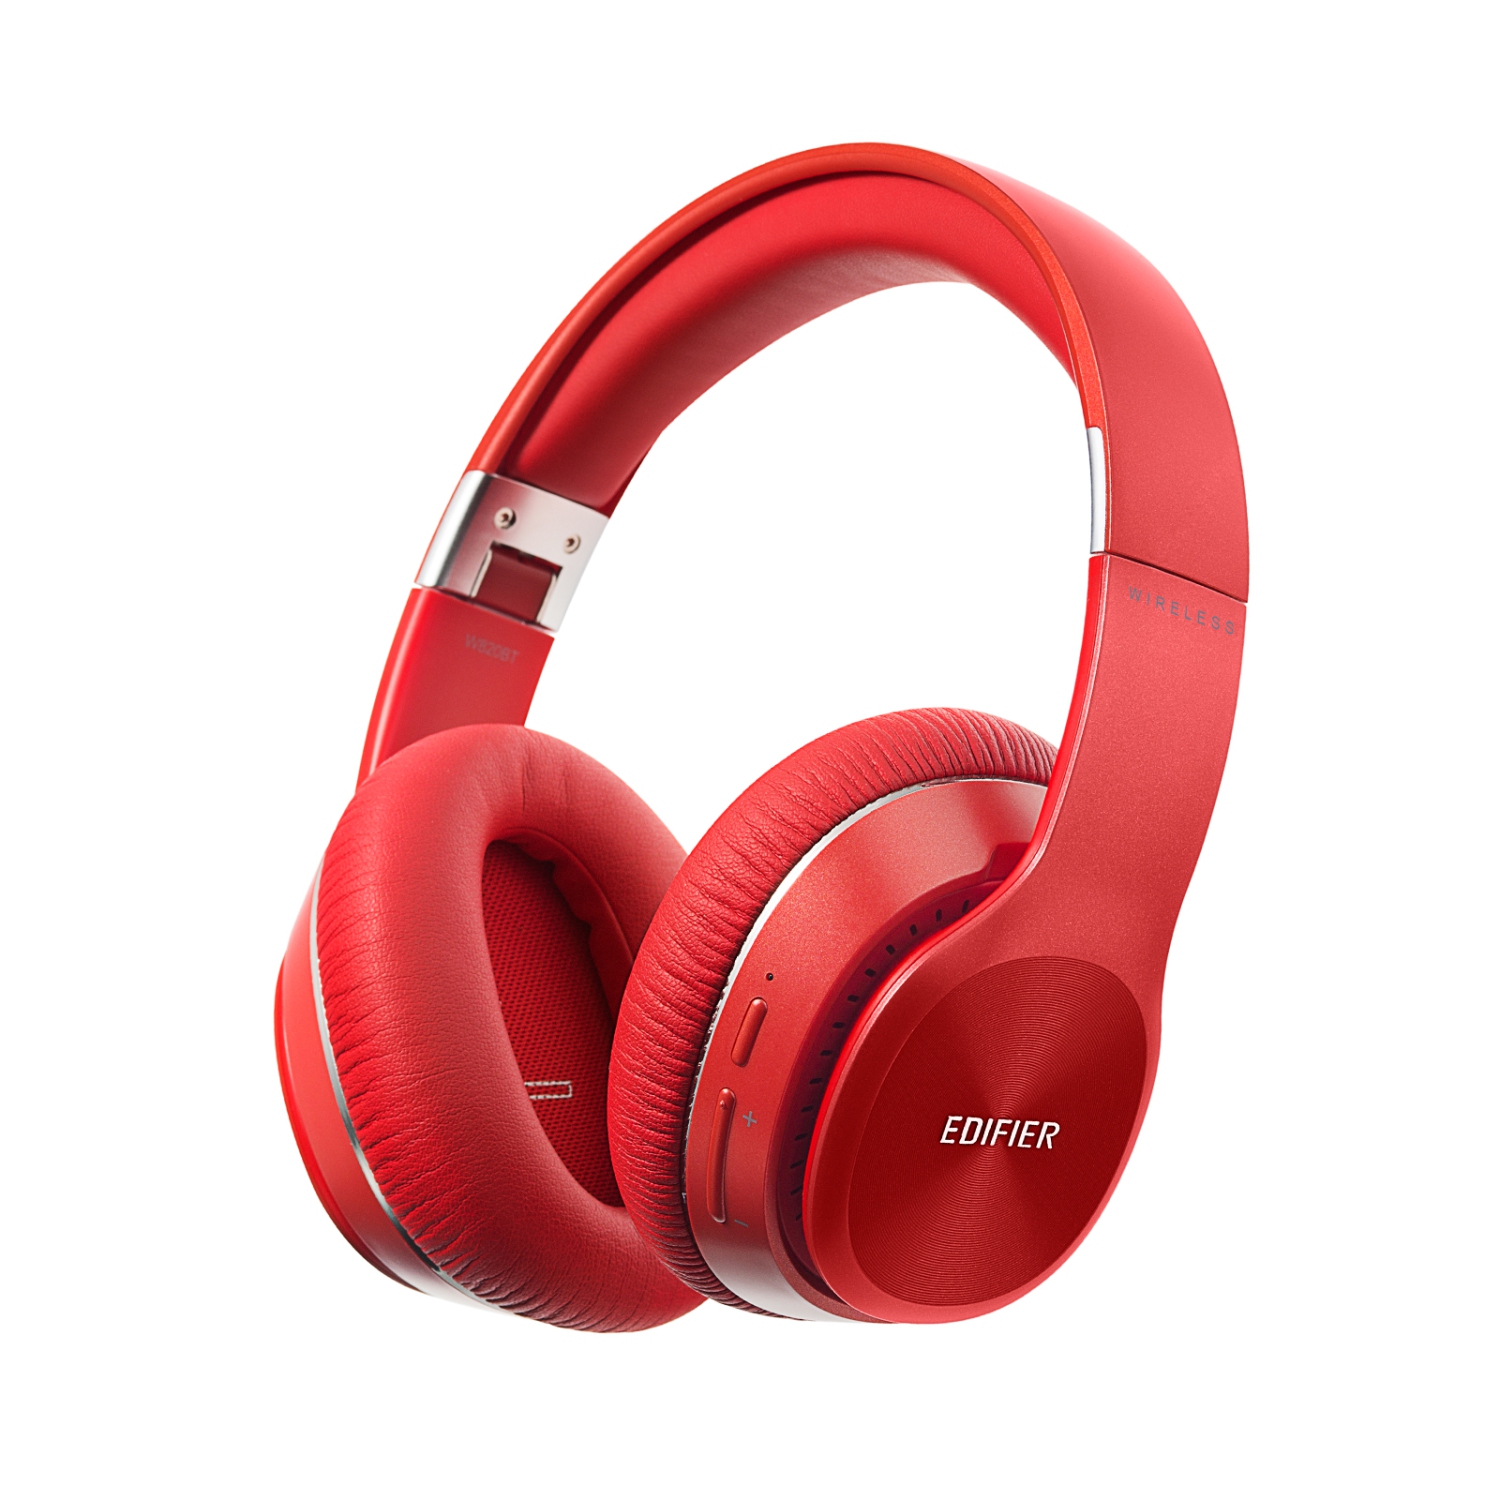 Edifier W820BT Bluetooth v4.1 Stereo Headphones Foldable 80 Hours of Battery Life Flexible Steel Headband Comfortable - Red